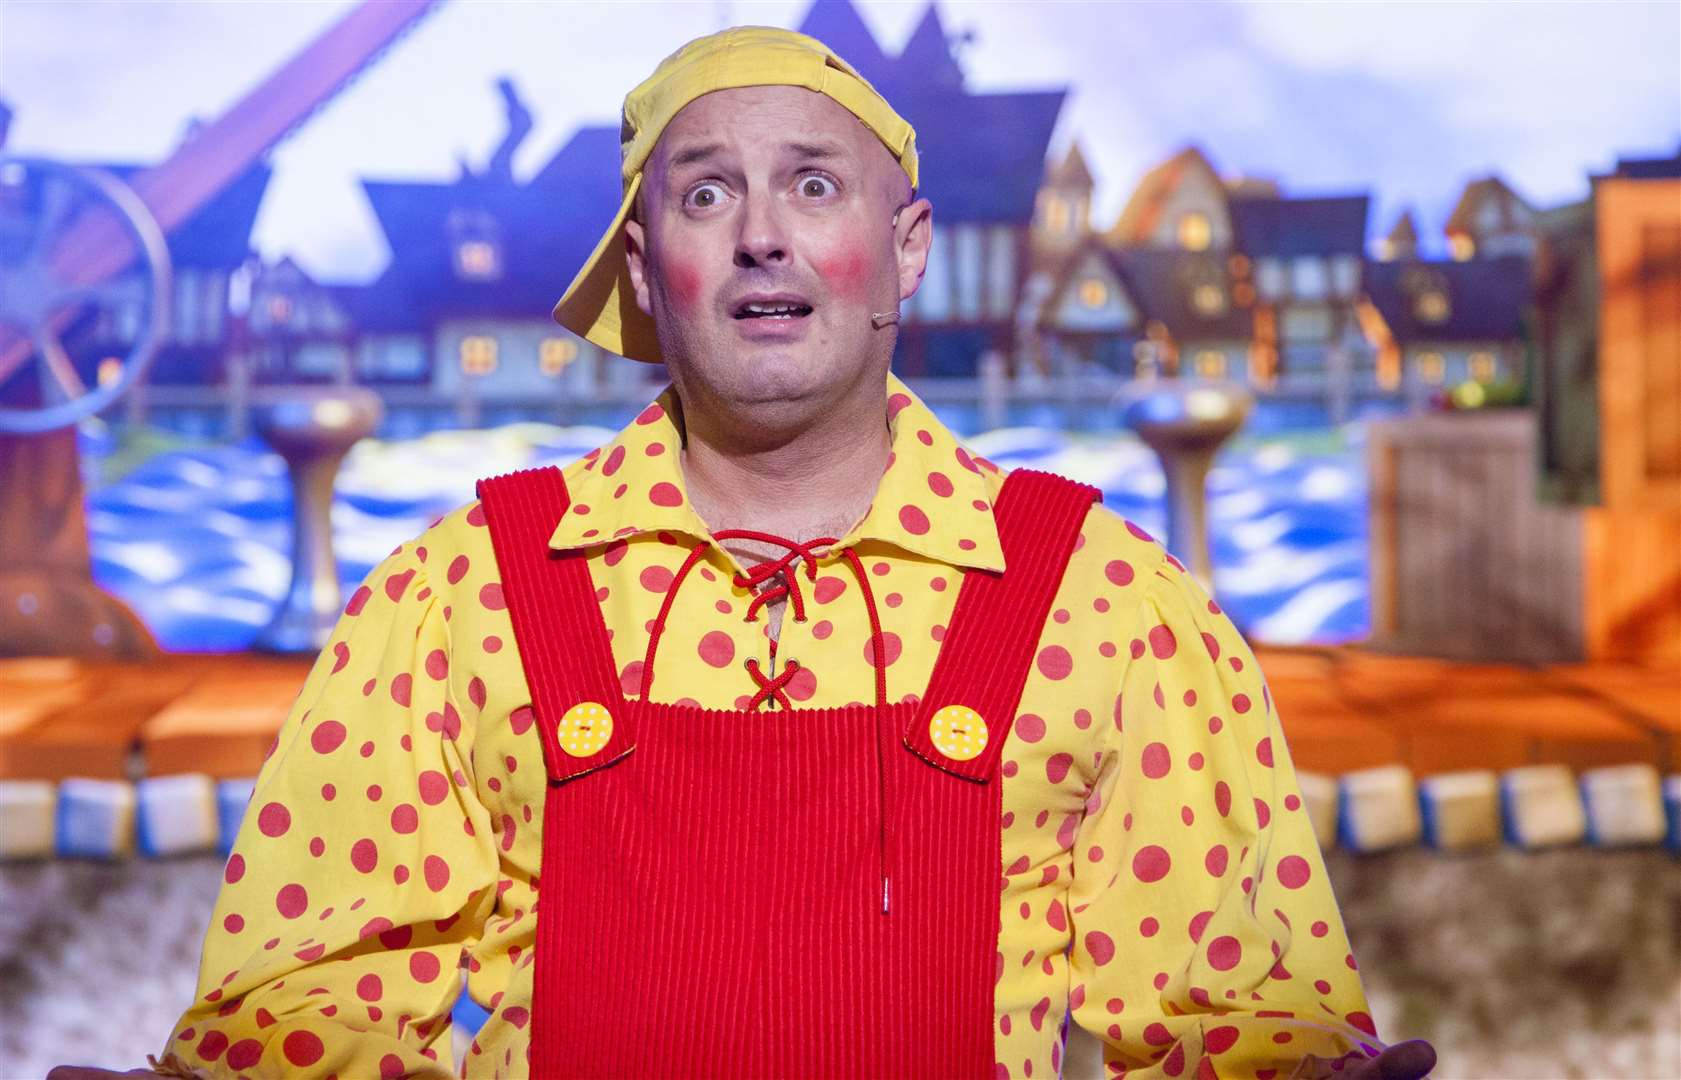 Radio presenter Ant Payne has performed in panto at The Stag Theatre